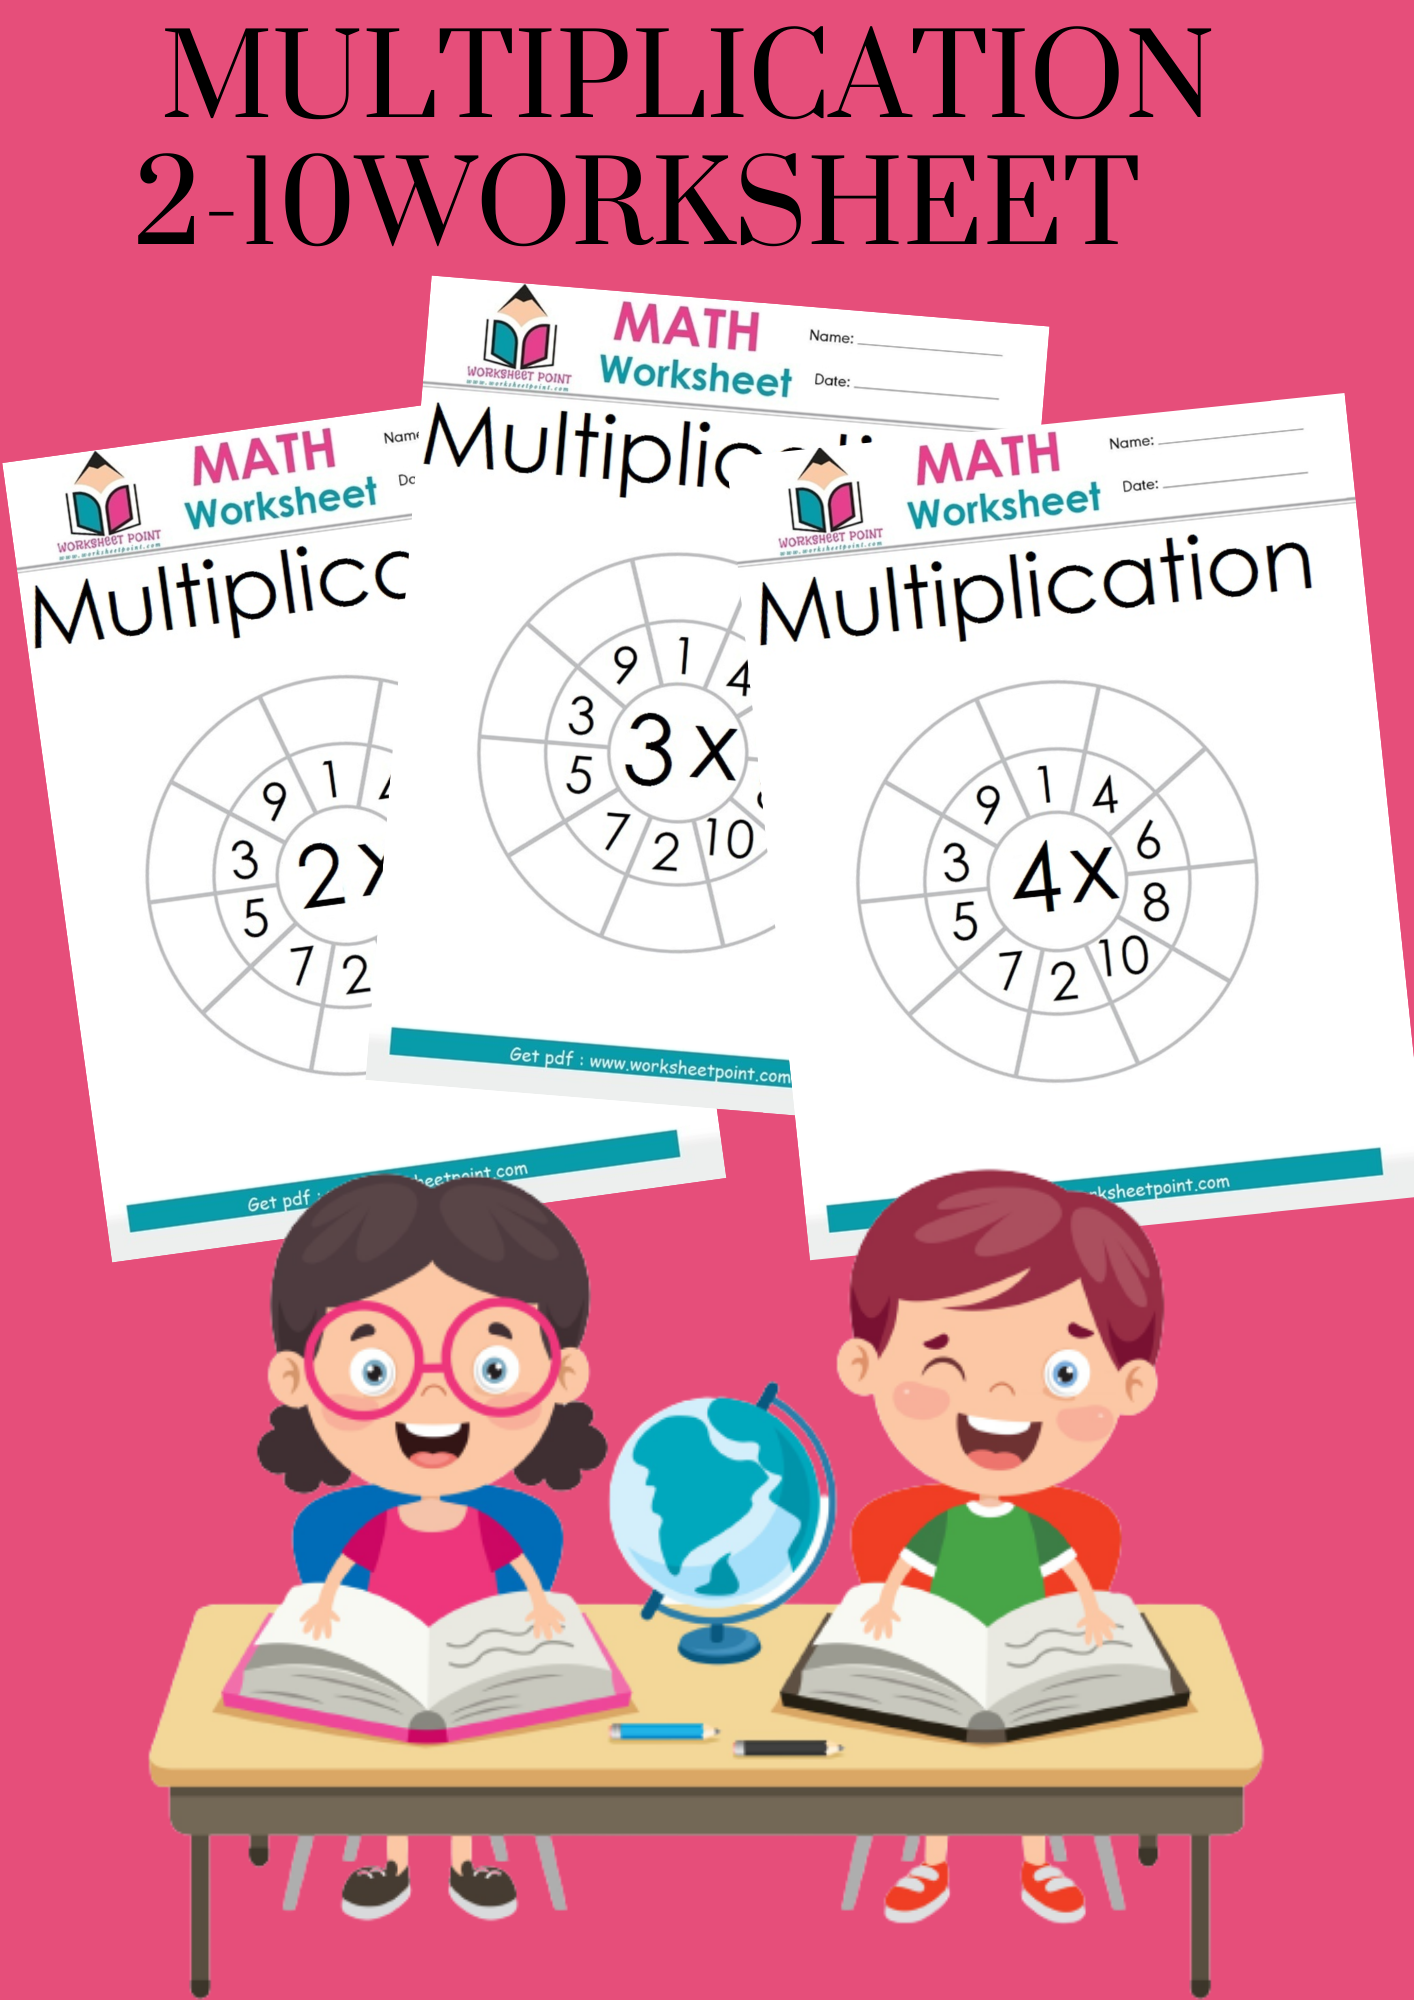 Rich Rusults on Google's SERP when searching for 'Multiplication 2 -10 Math Worksheet'